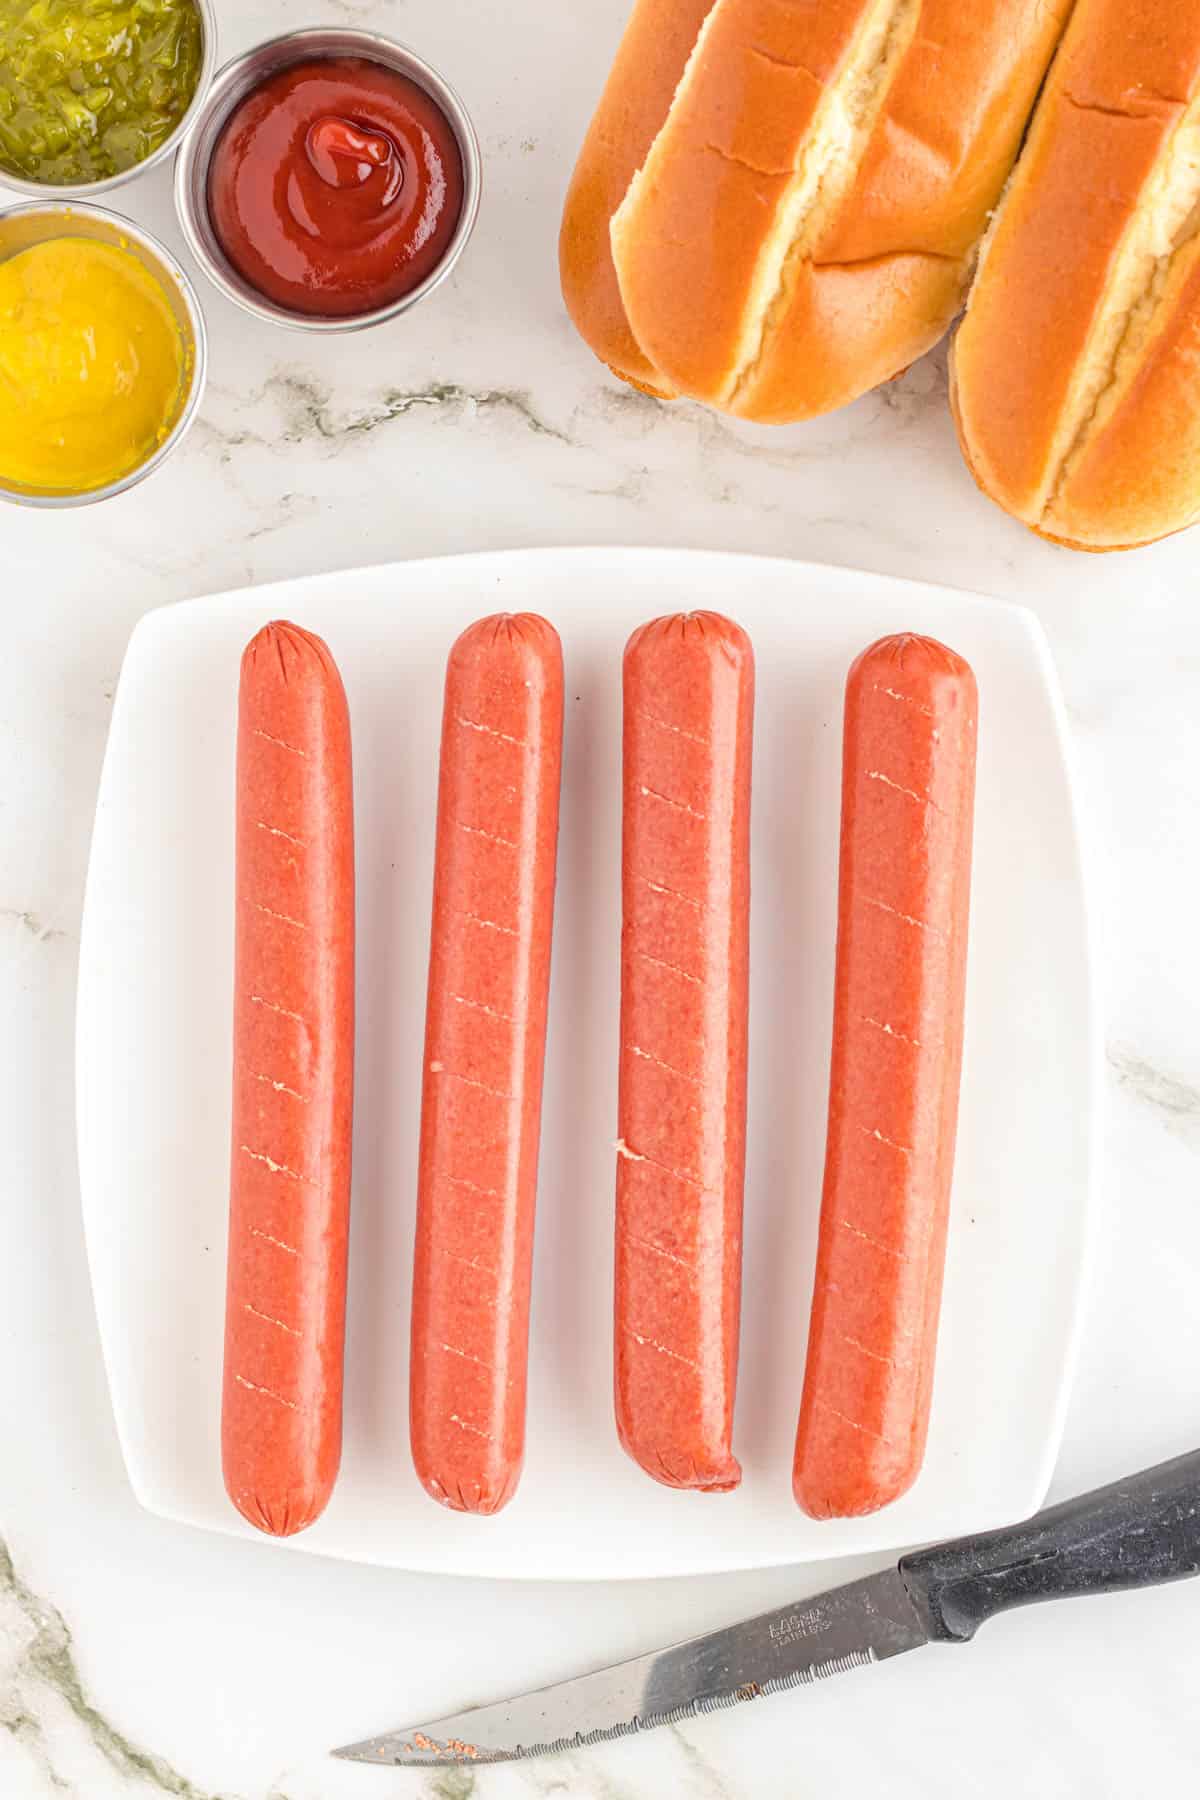 wieners on a plate with slits cut in them